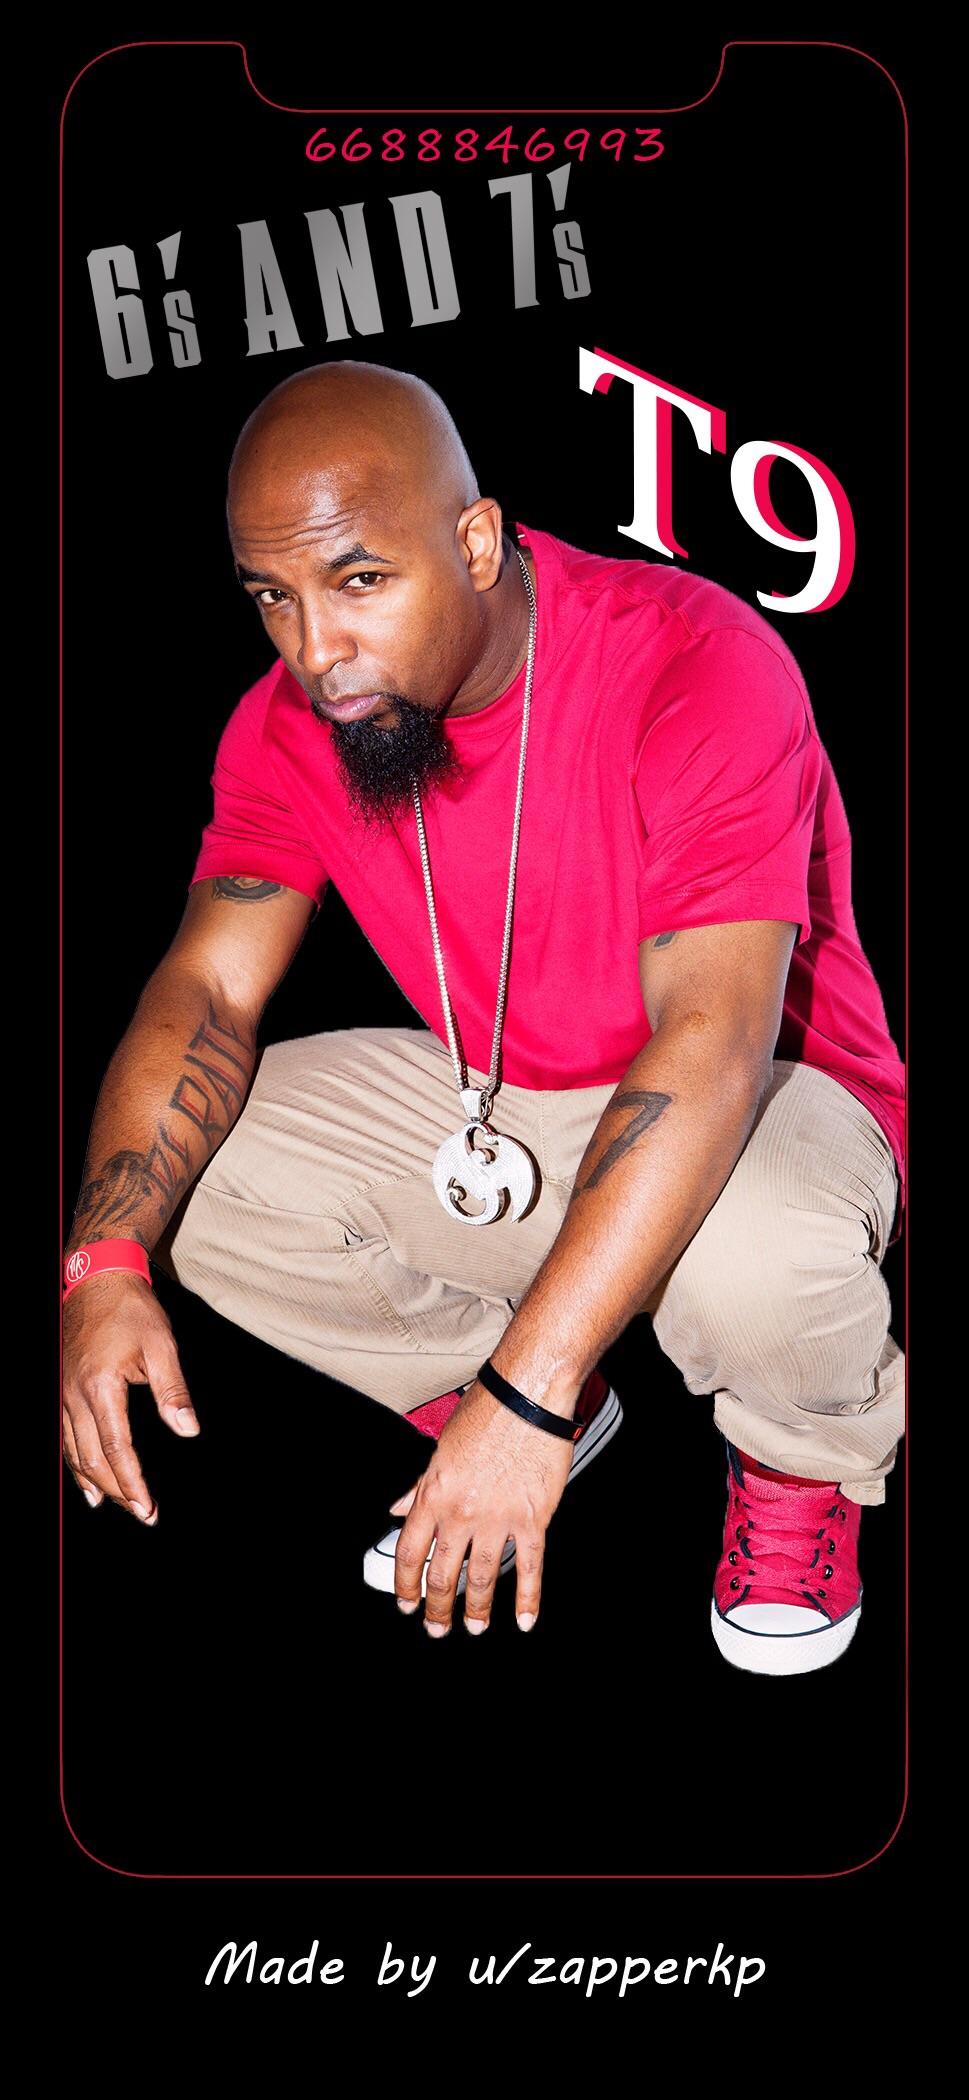 N9ne All 6's And 7's - HD Wallpaper 